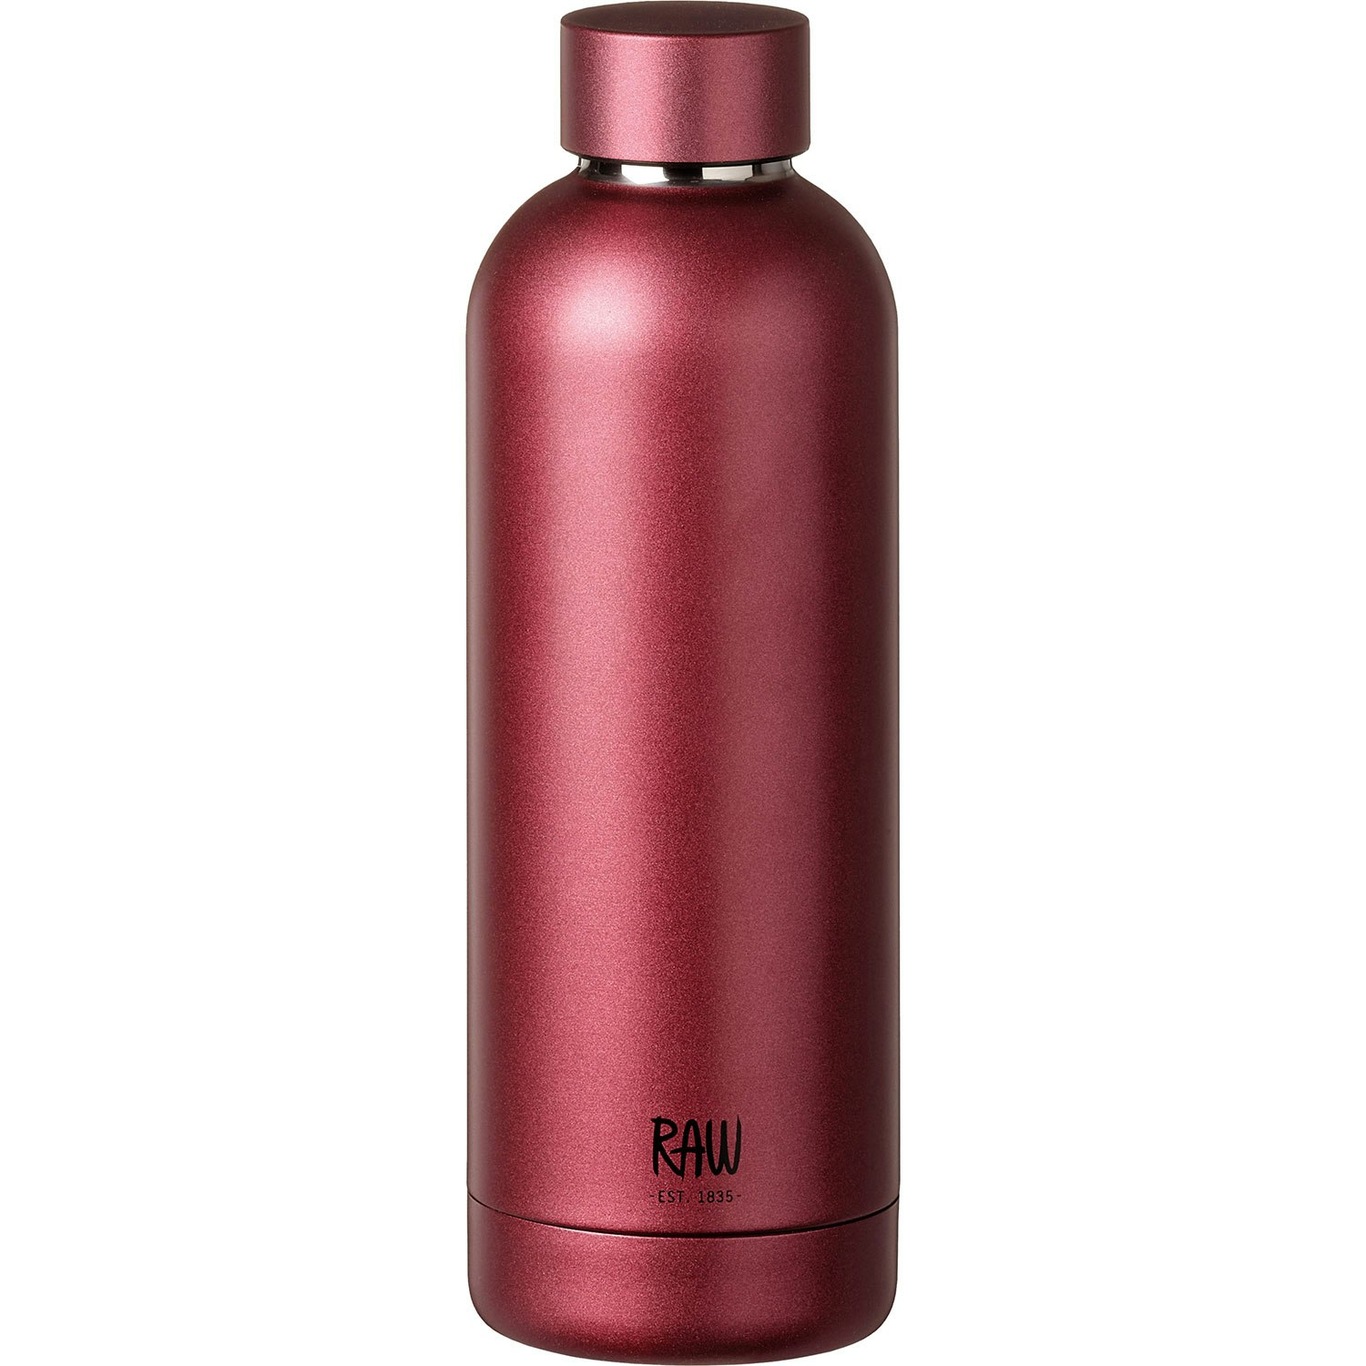 https://royaldesign.com/image/11/aida-raw-to-go-thermo-bottle-copper-s-s-05-l-1-pcs-1?w=800&quality=80